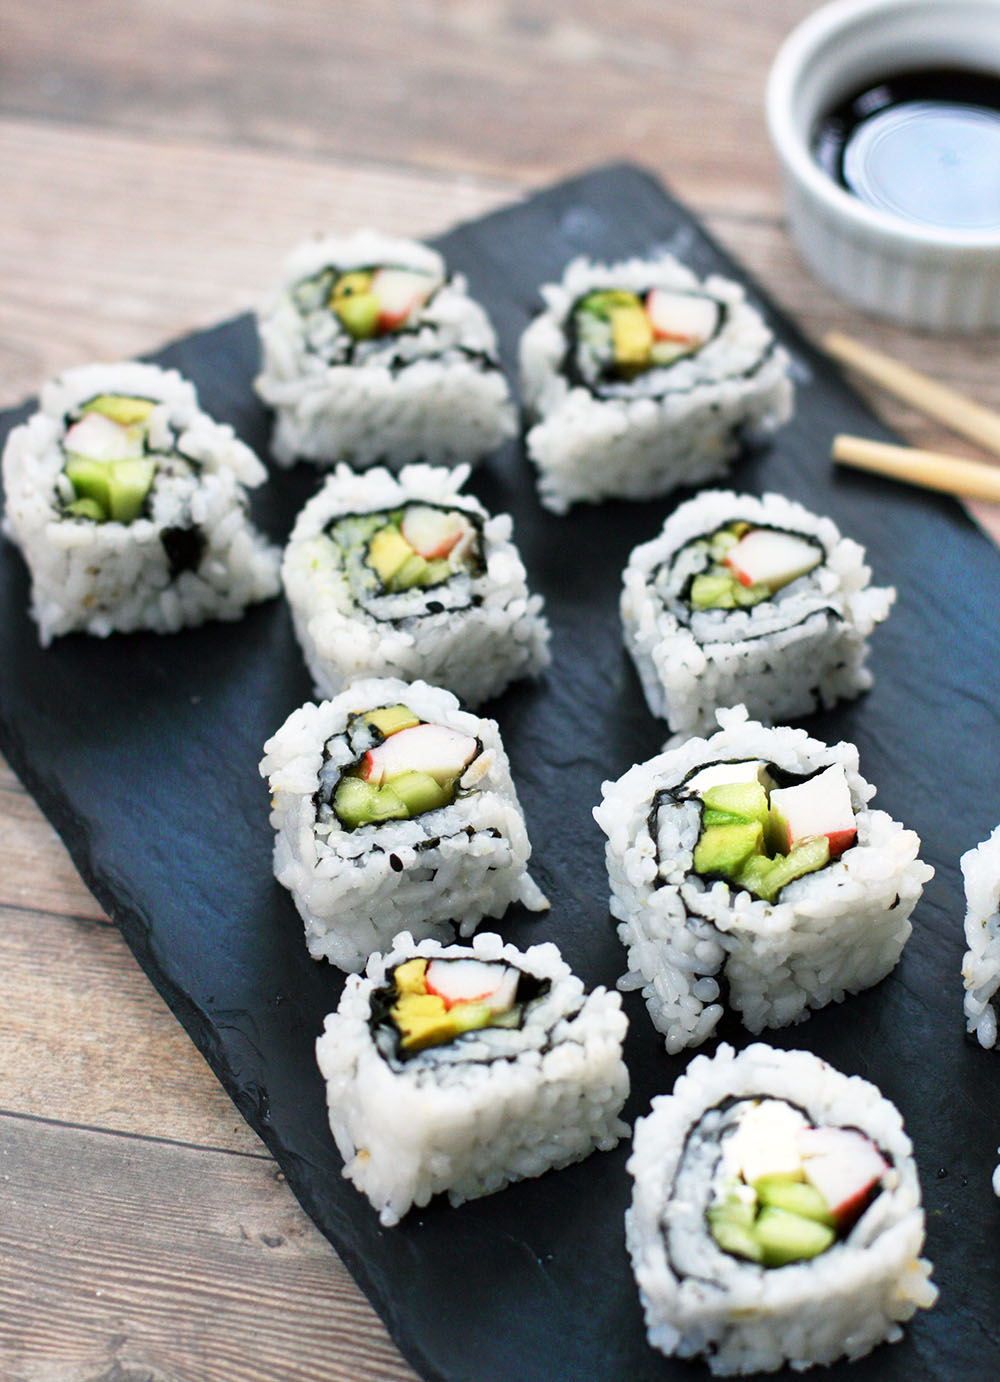 How to make cheap California rolls at home. You'll spend WAY less when you make homemade sushi at home!